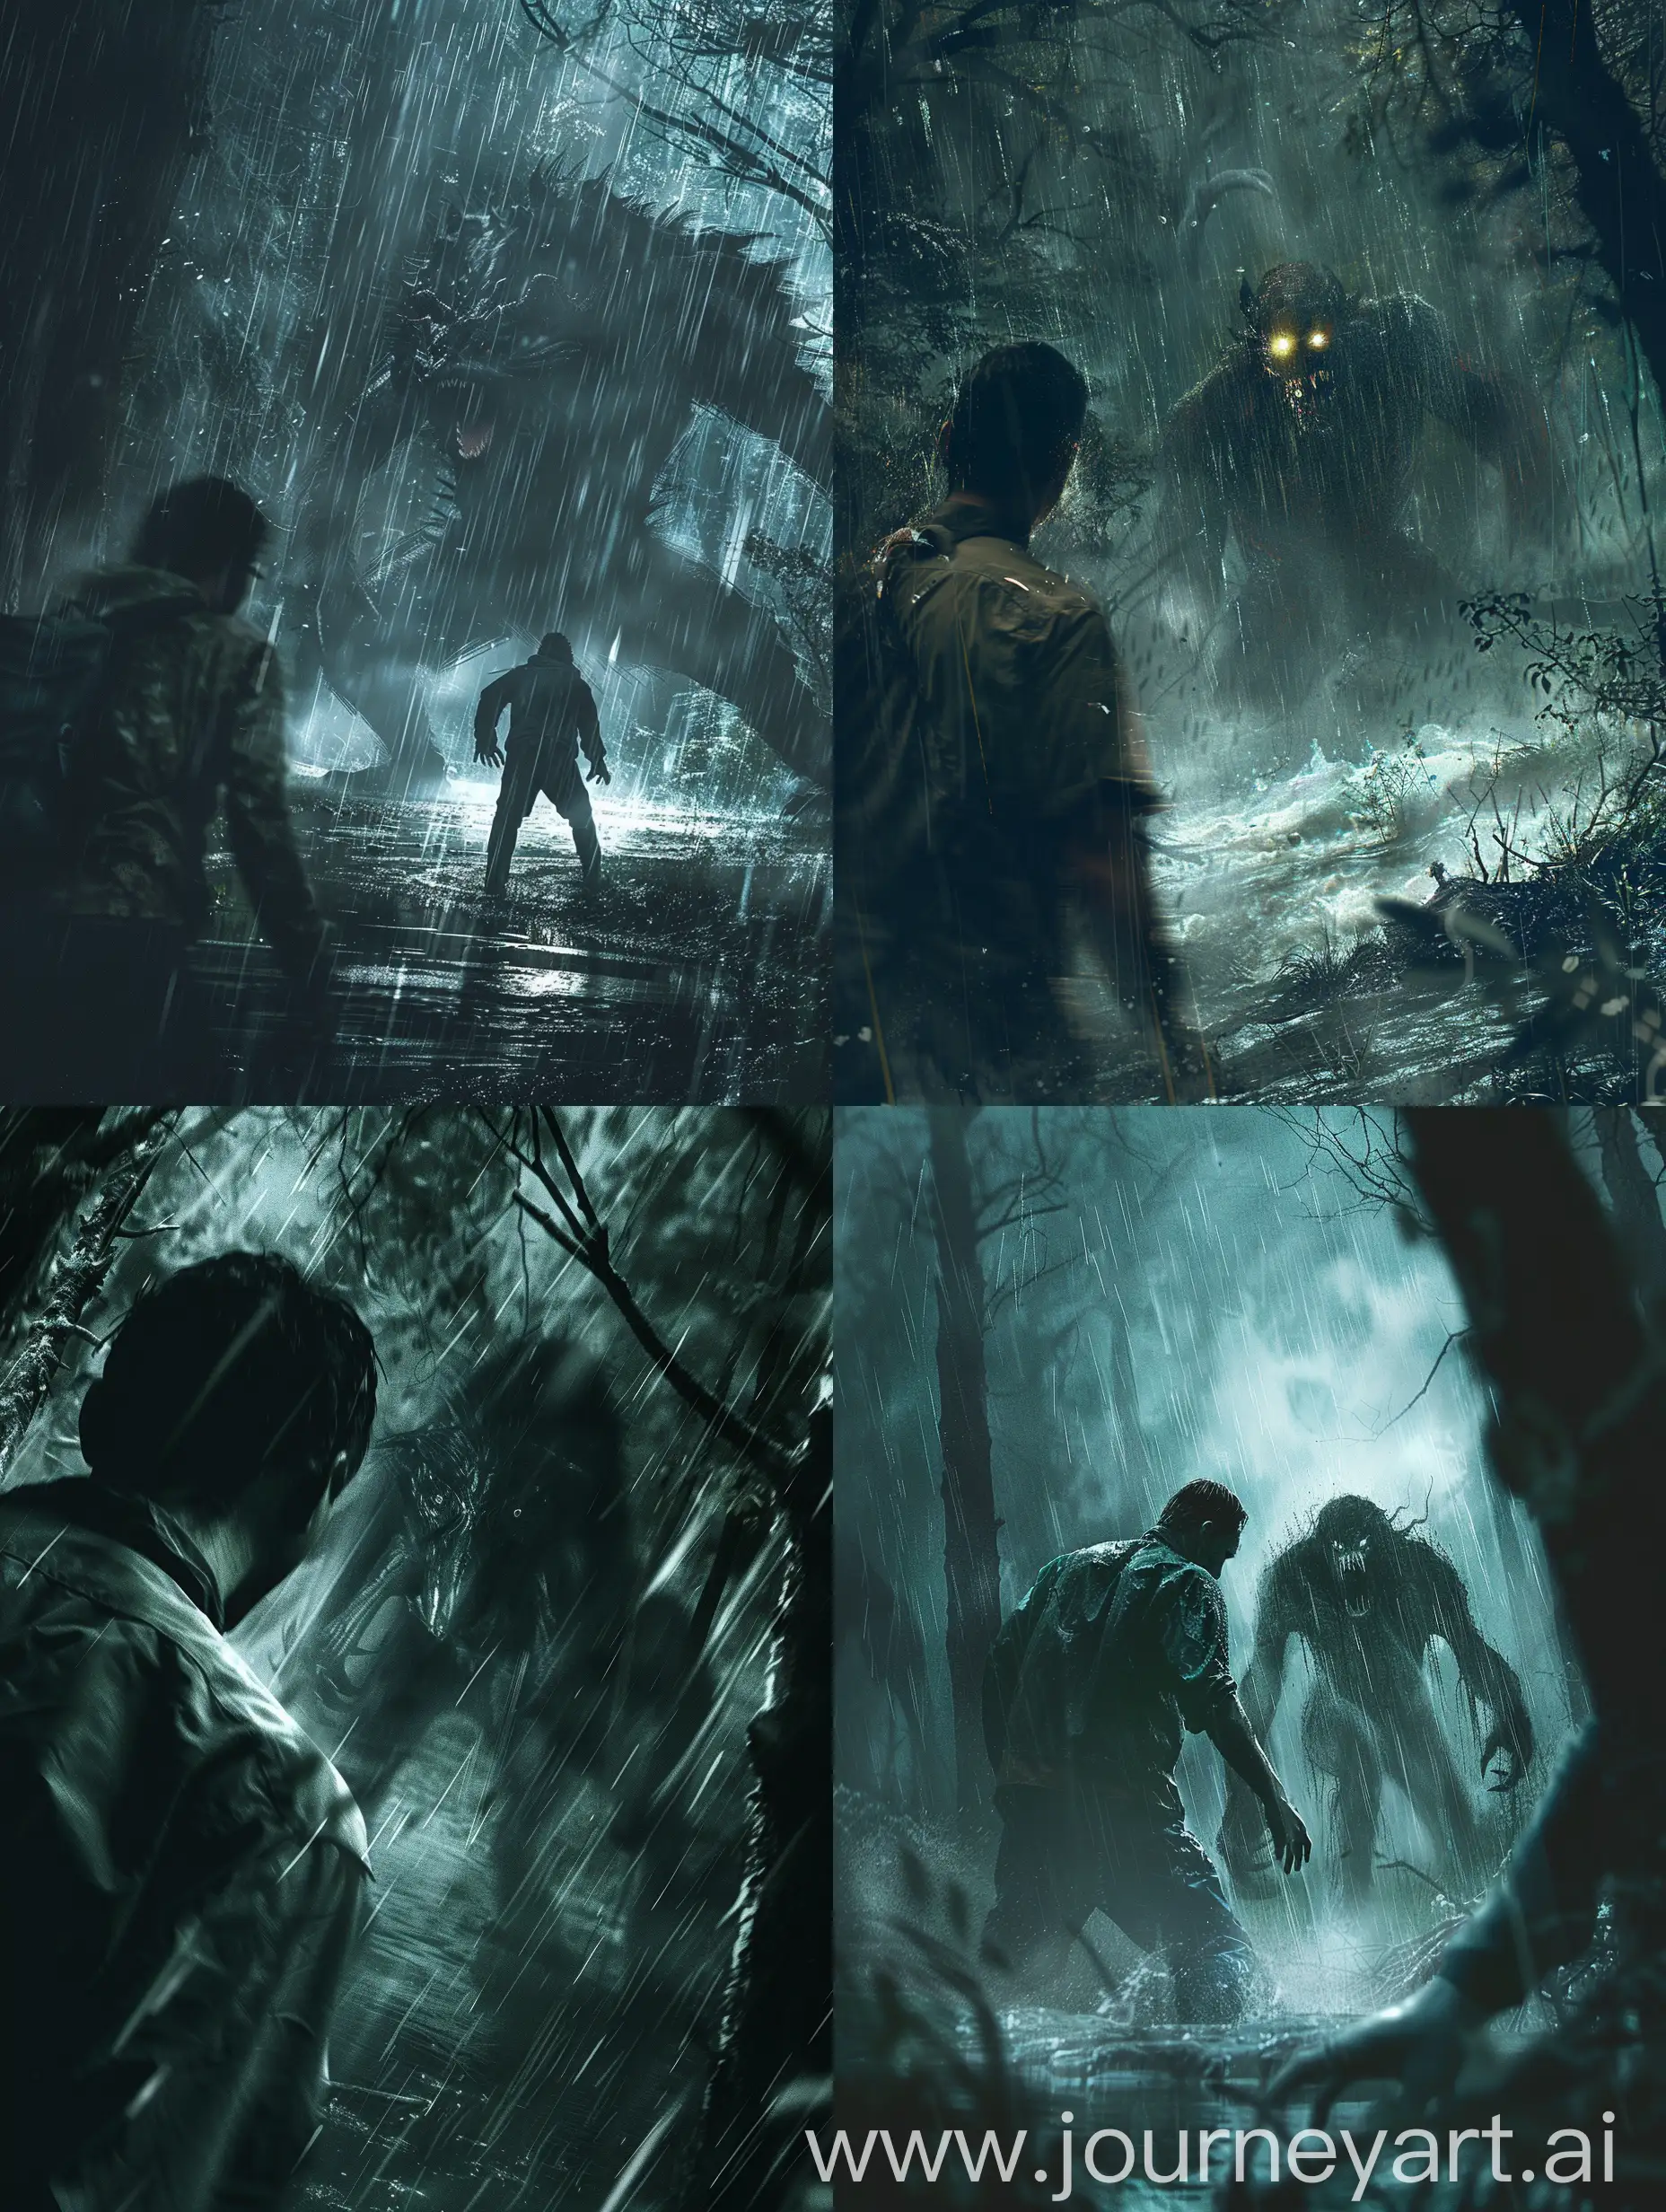 A man is in a dark and rainy forest, an evil creature is lurking behind him, cinematic